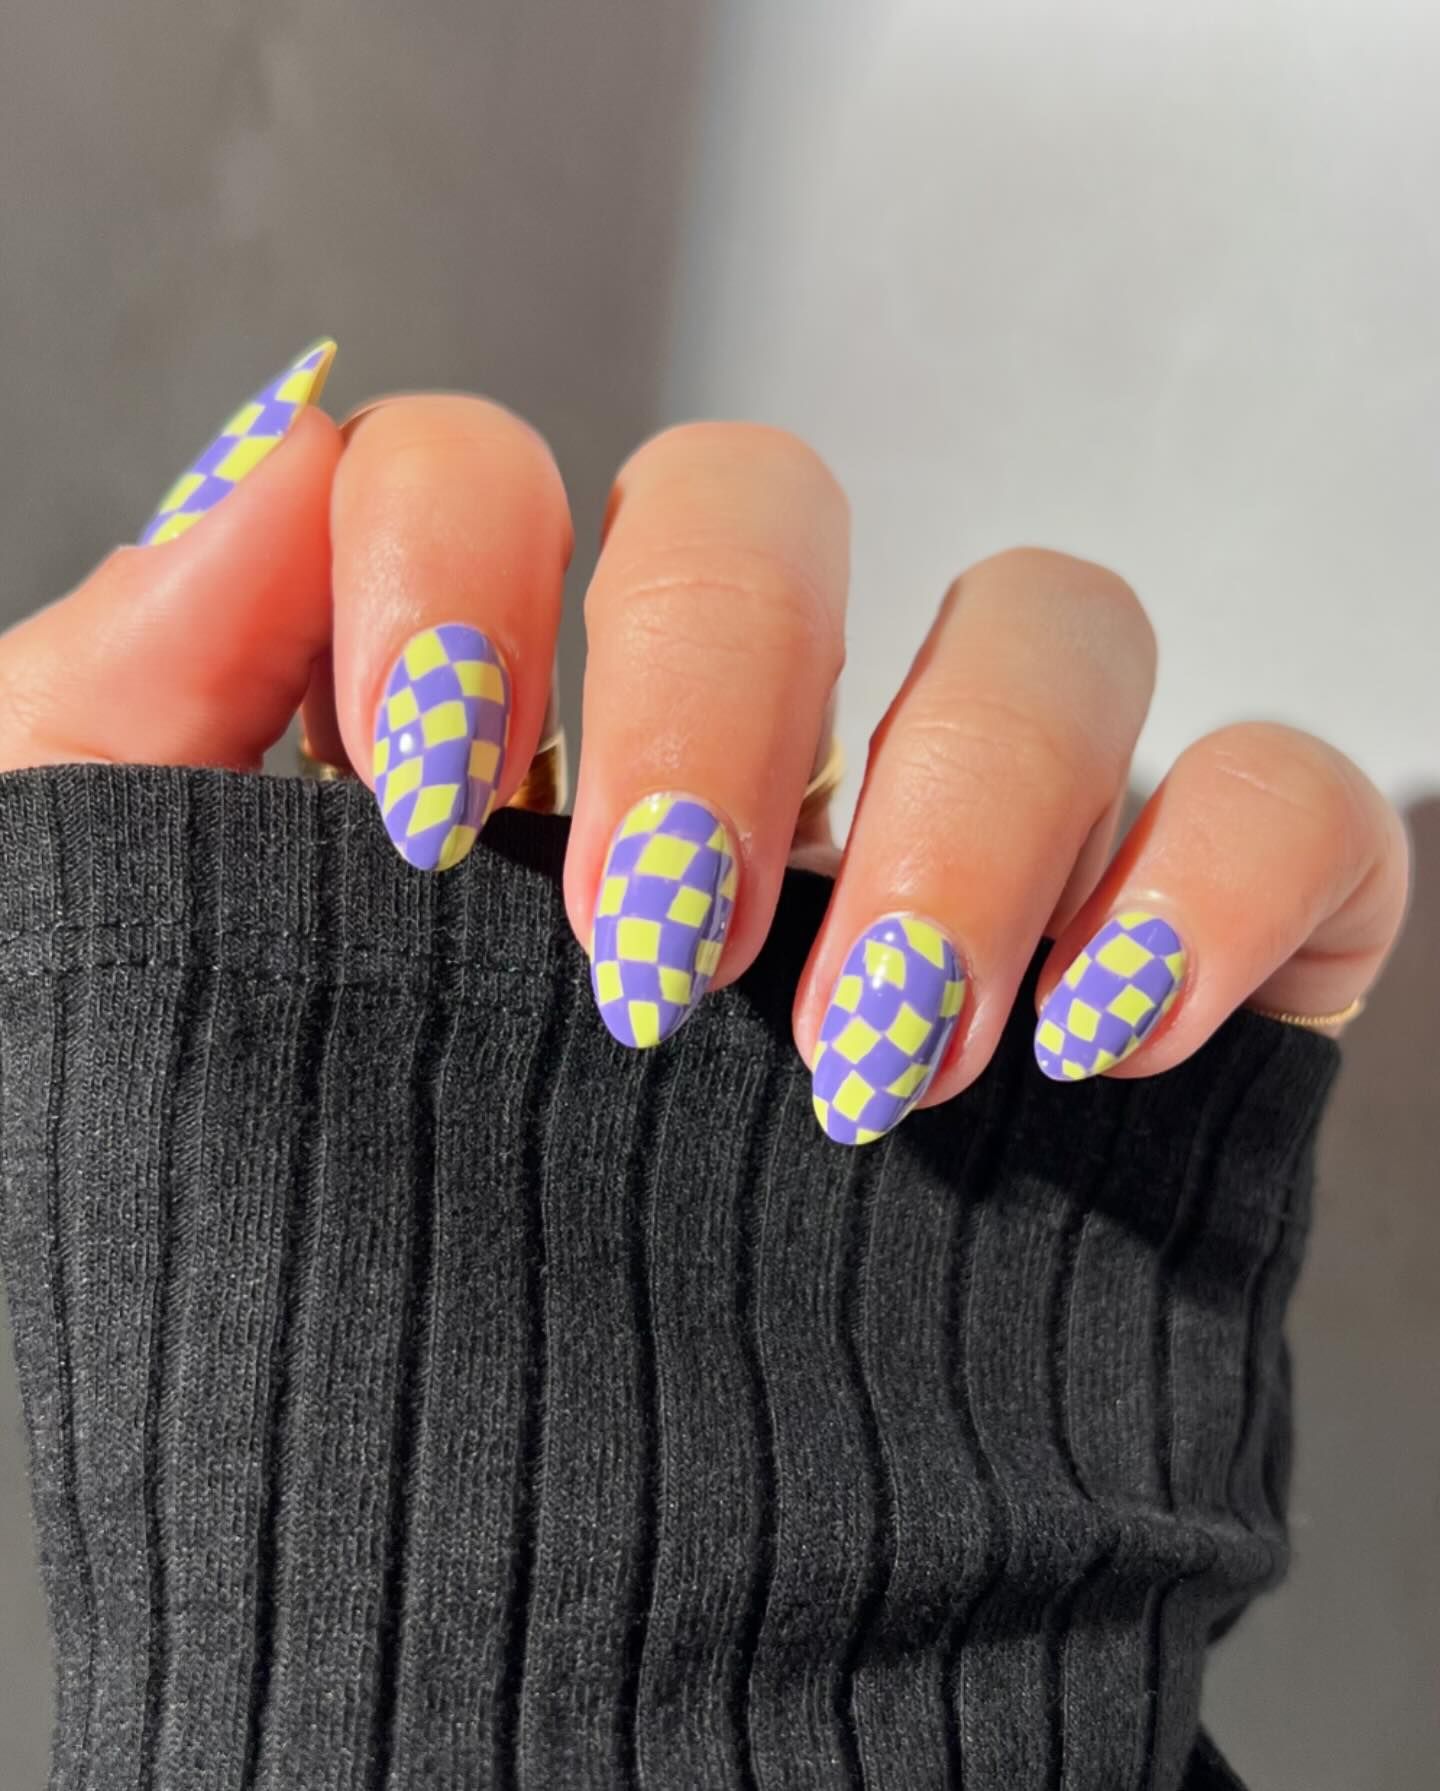 100+ Short Nail Designs You’ll Want To Try This Year images 99